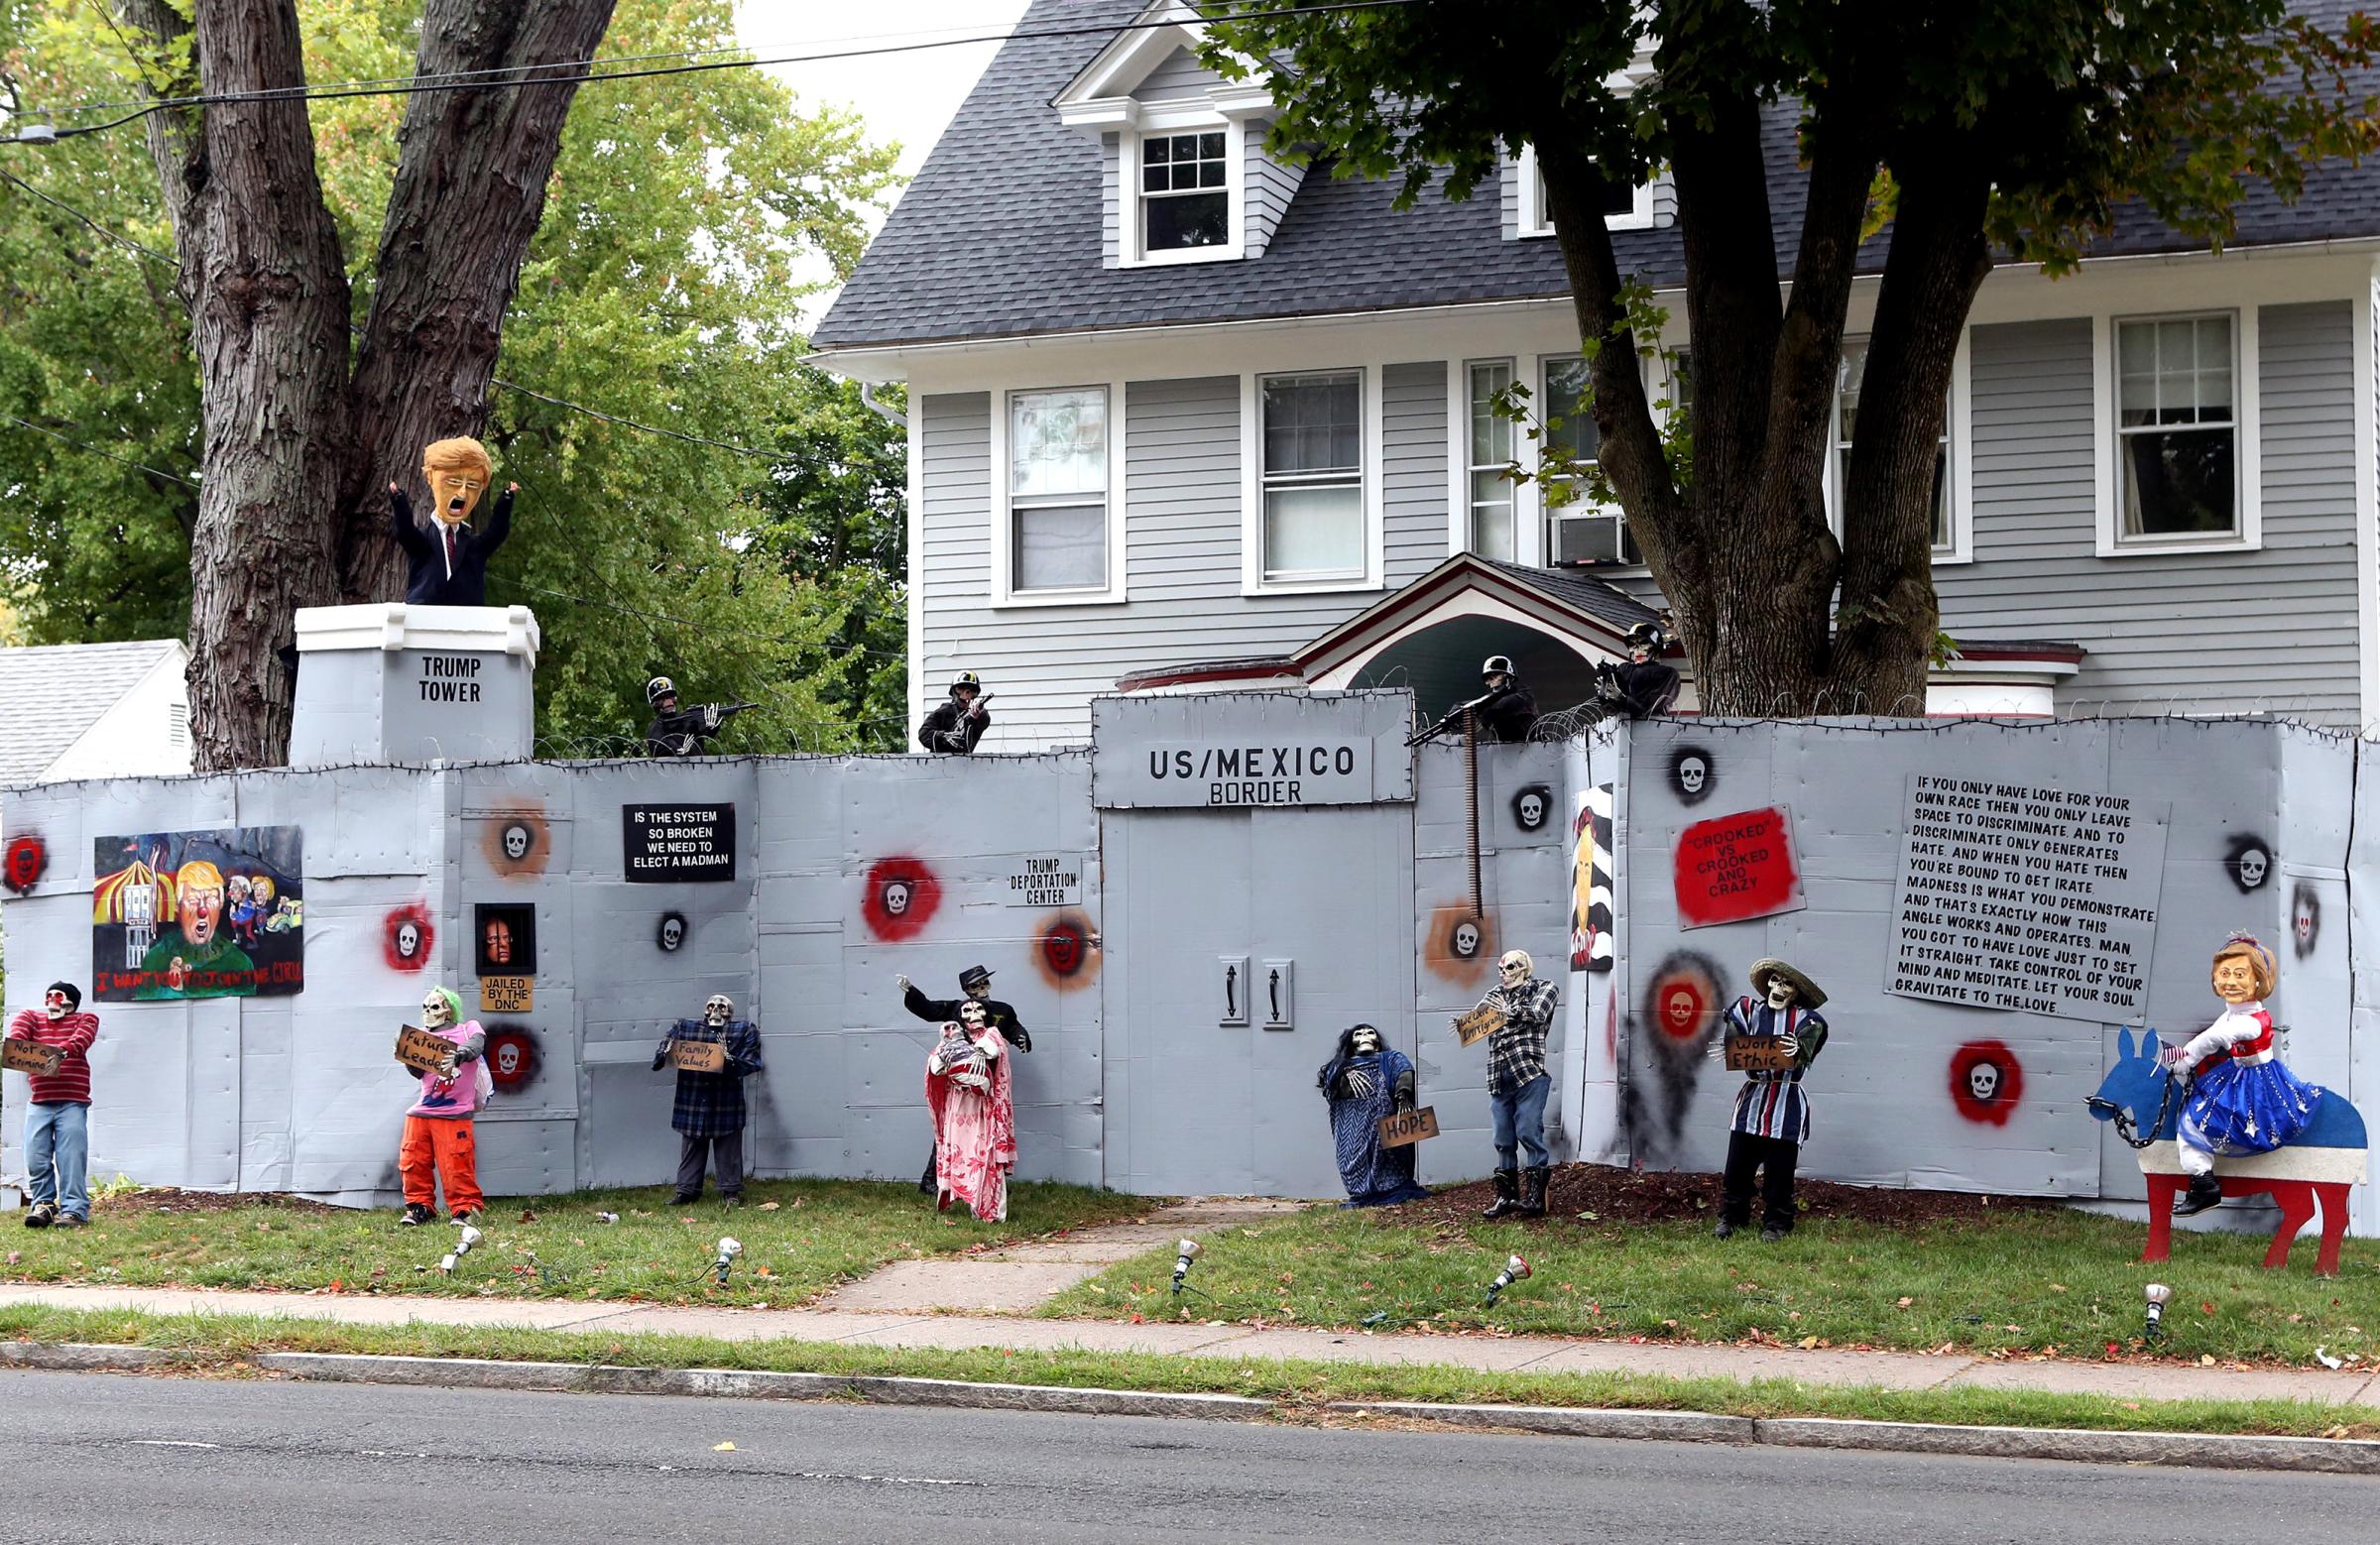 A display features a "border wall" and figures in the likeness of Donald Trump, Hillary Clinton and Bernie Sanders on the property of Matt Warshauer in West Hartford, Conn. on Oct. 4, 2016.